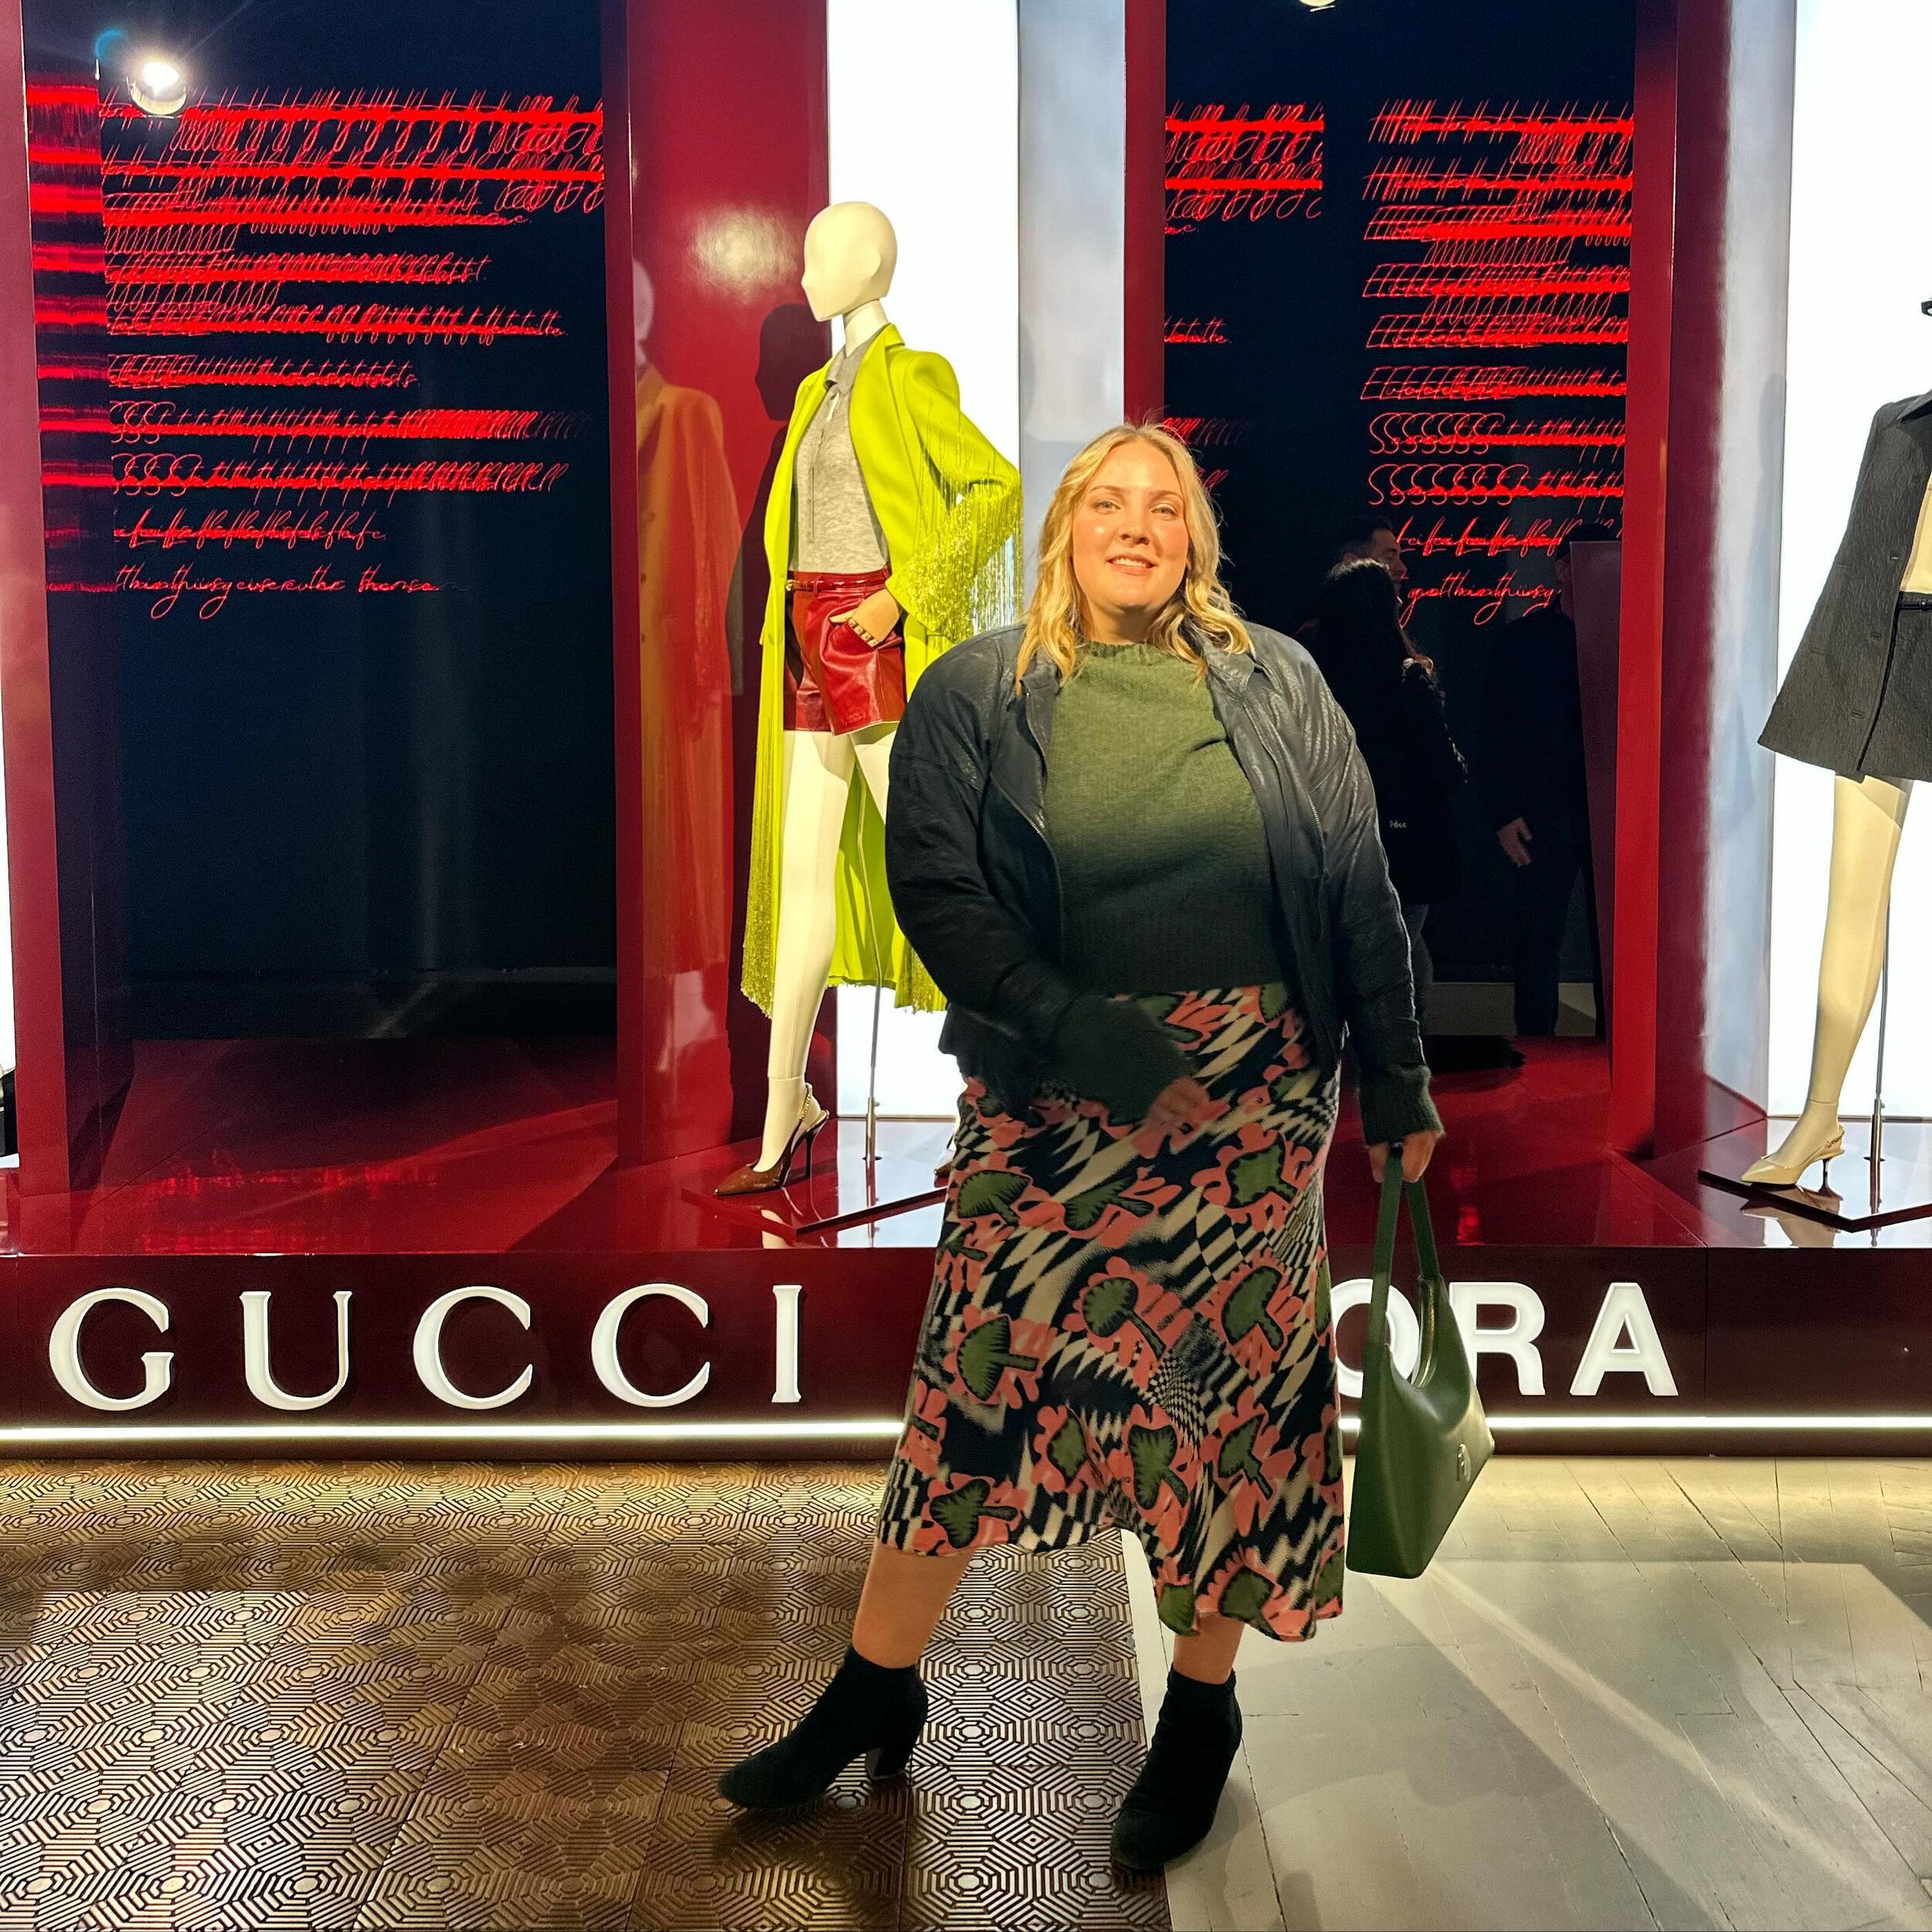 Delighted to celebrate the one and only @sashastiles last night and her mesmerizing work, &lsquo;REPETAE: Again, Again,&rsquo; at @gucci.

Thanks, Sasha, for making poems glam. And for being a touchstone of warmth and humanity in the AI era. 

If you